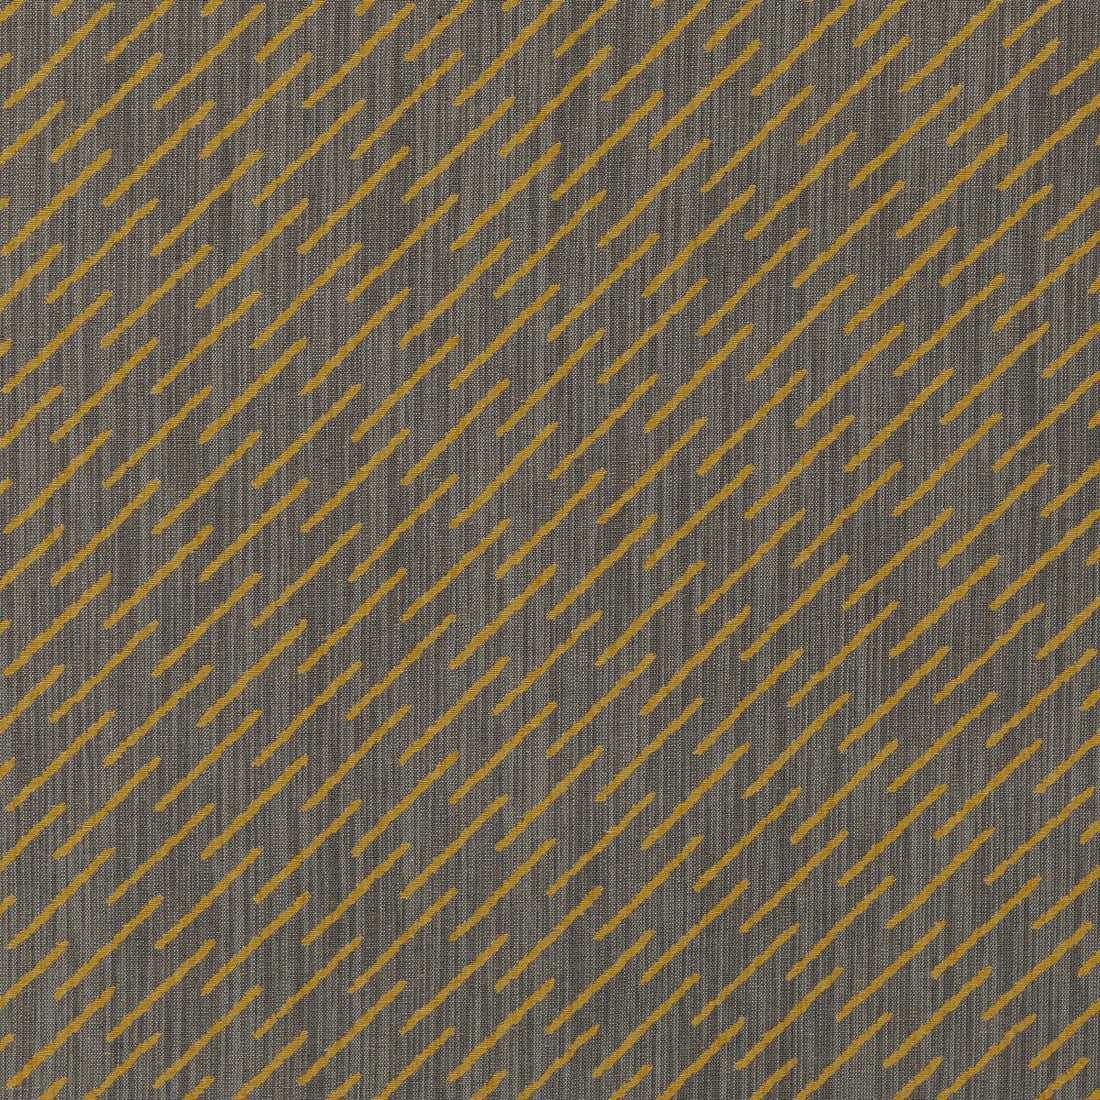 Esker Weave fabric in coin/taupe color - pattern GWF-3759.1064.0 - by Lee Jofa Modern in the Kelly Wearstler VI collection